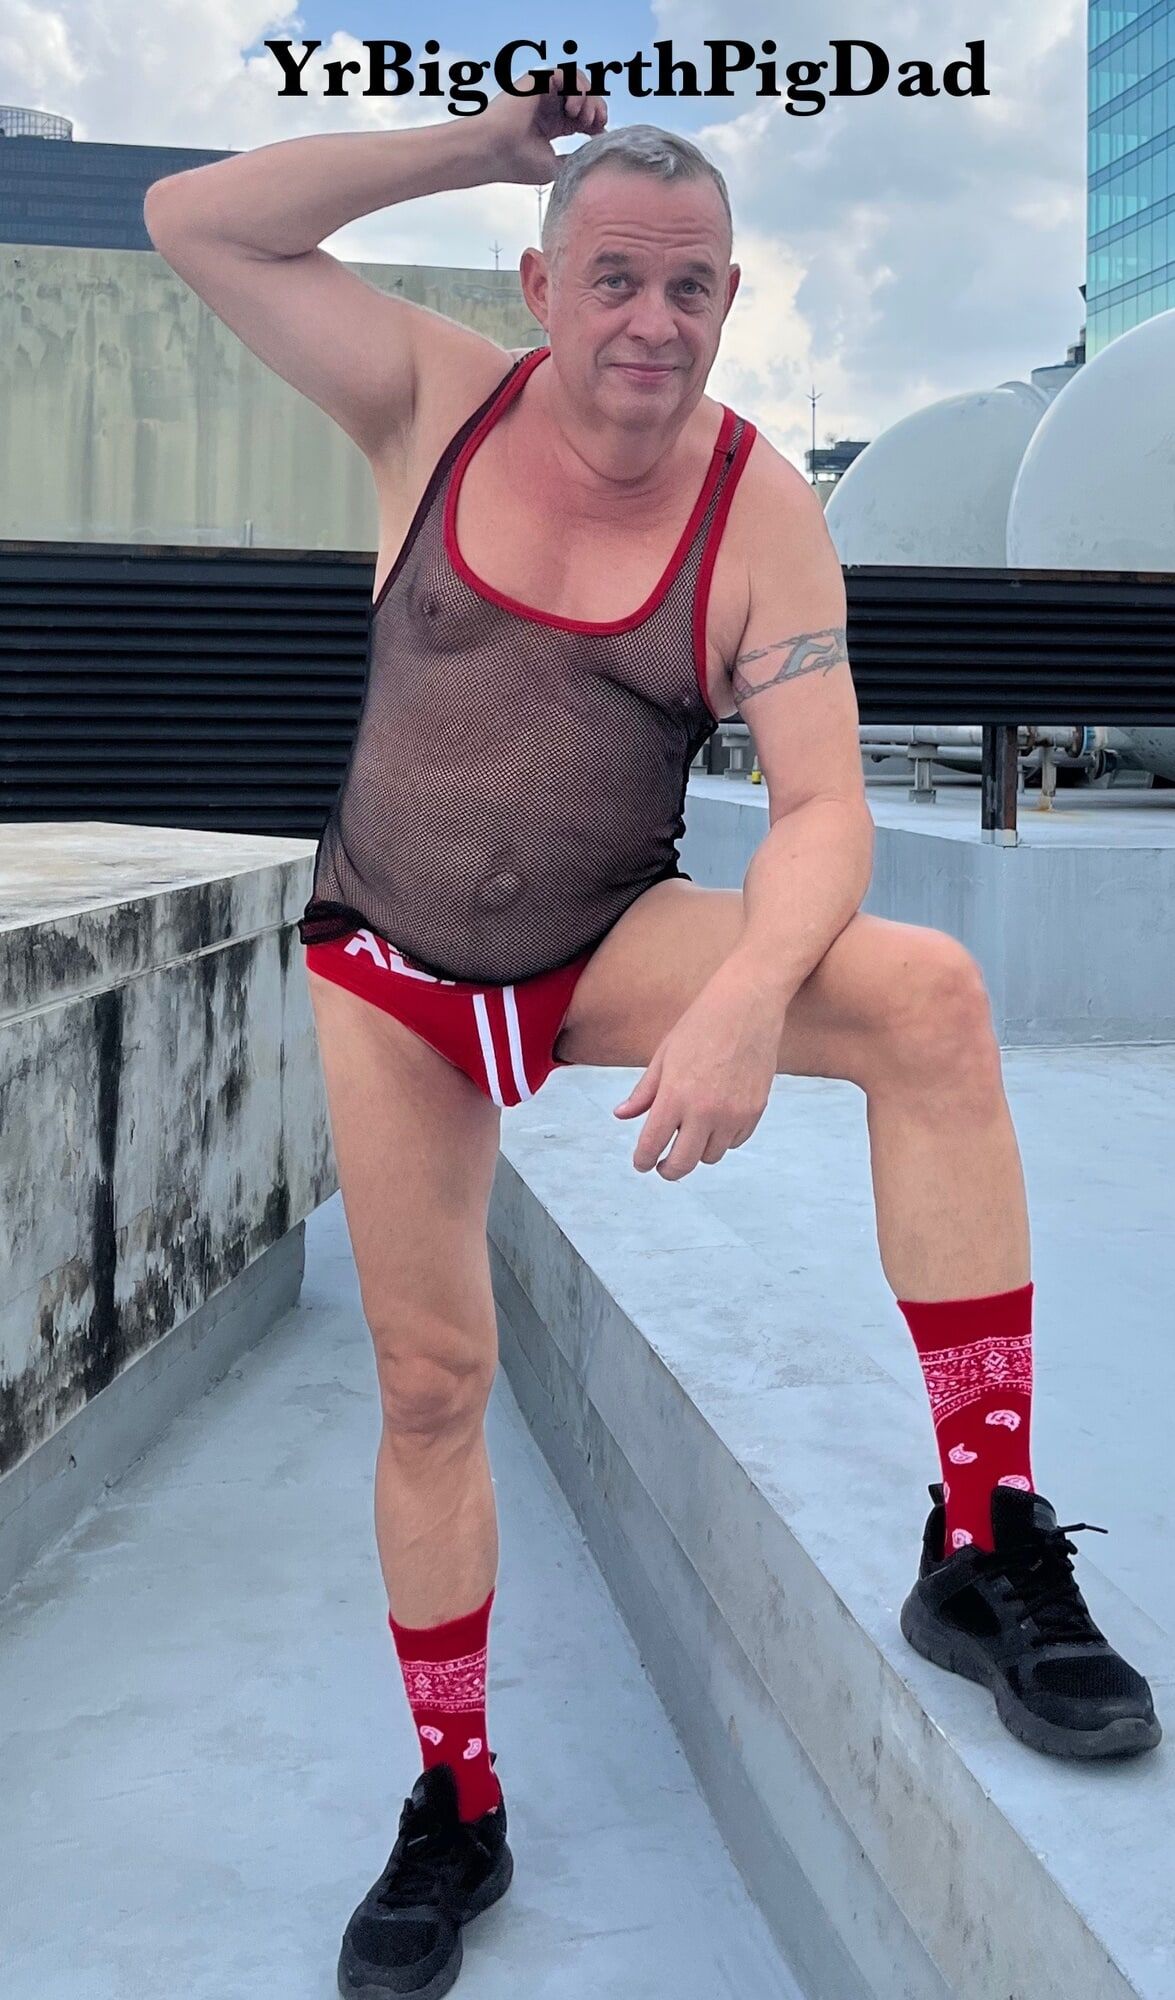 New Jockstrap collection on the roof of my condo. #24